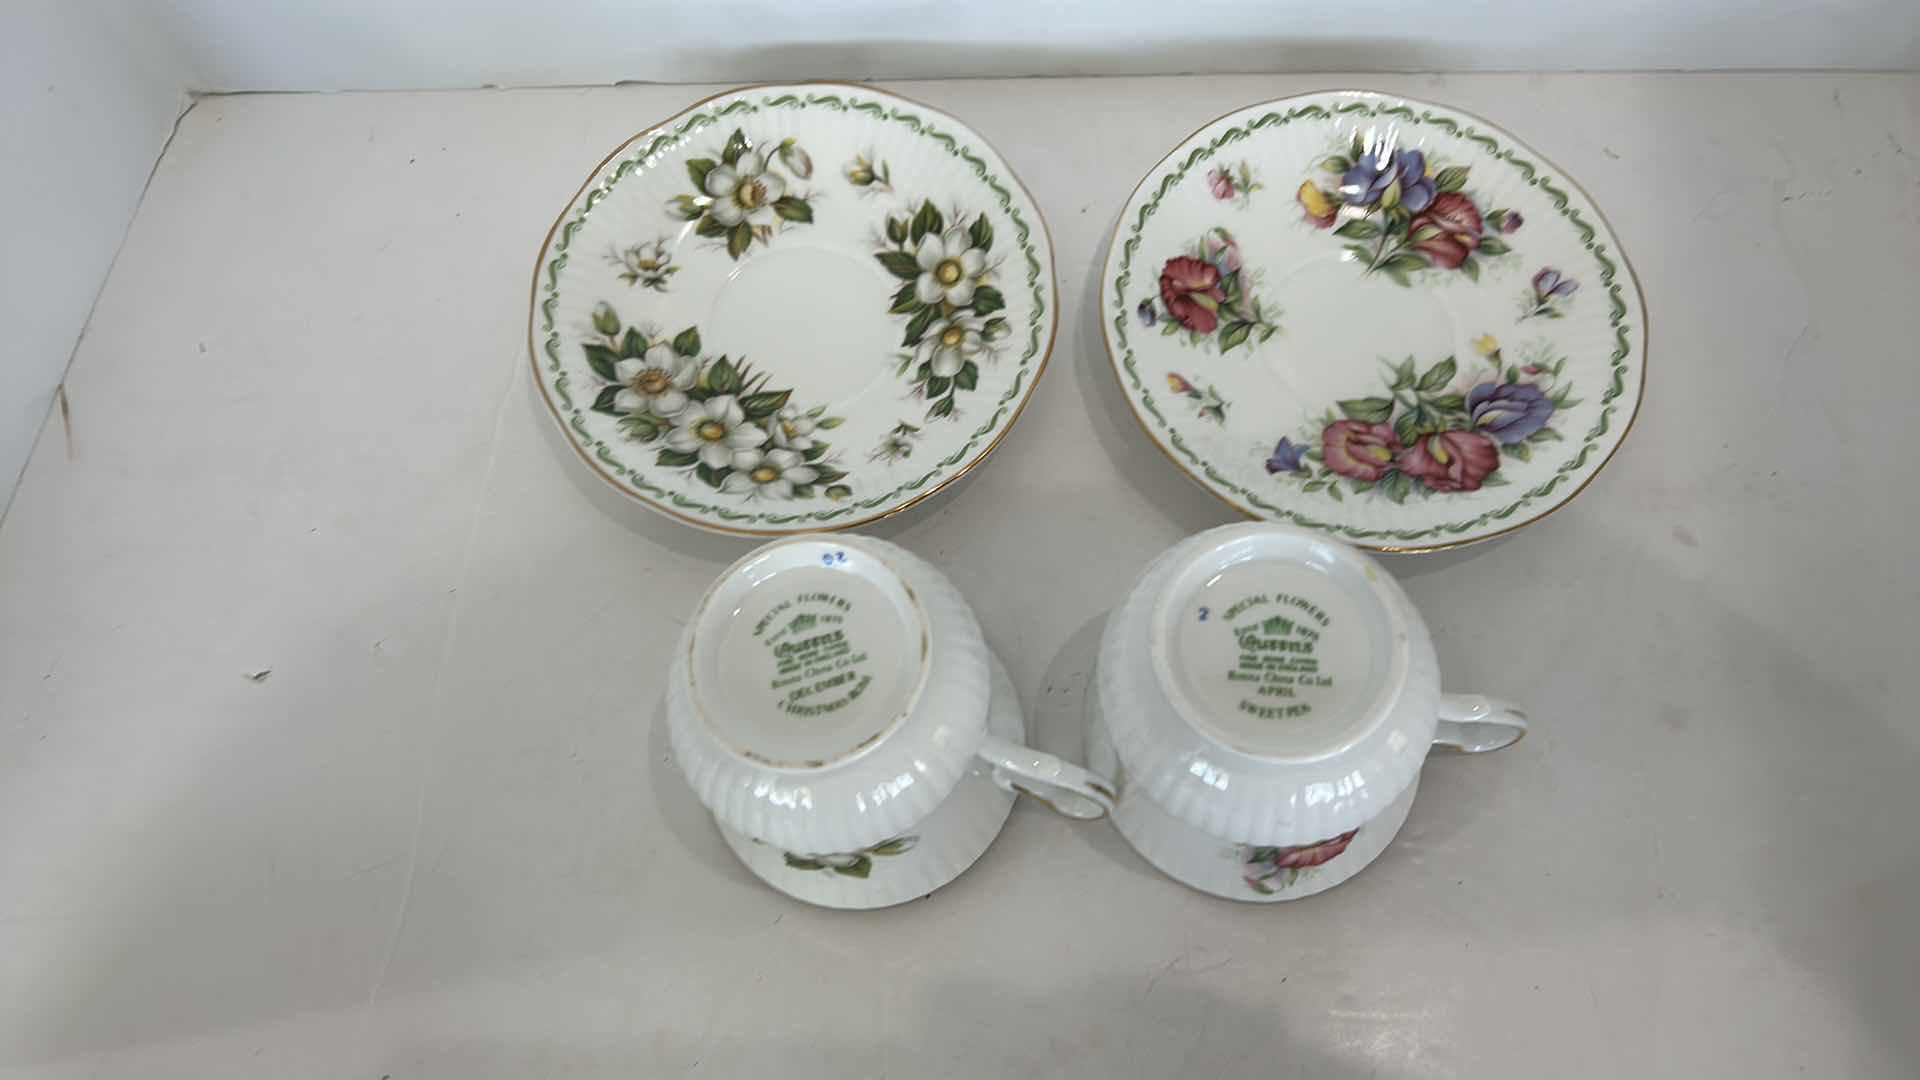 Photo 4 of 2 COLLECTIBE PORCELAIN TEACUPS AND SAUCERS, FINE BONE CHINA  FROM ENGLAND CHRISTMAS ROSE AND SWEET PEA